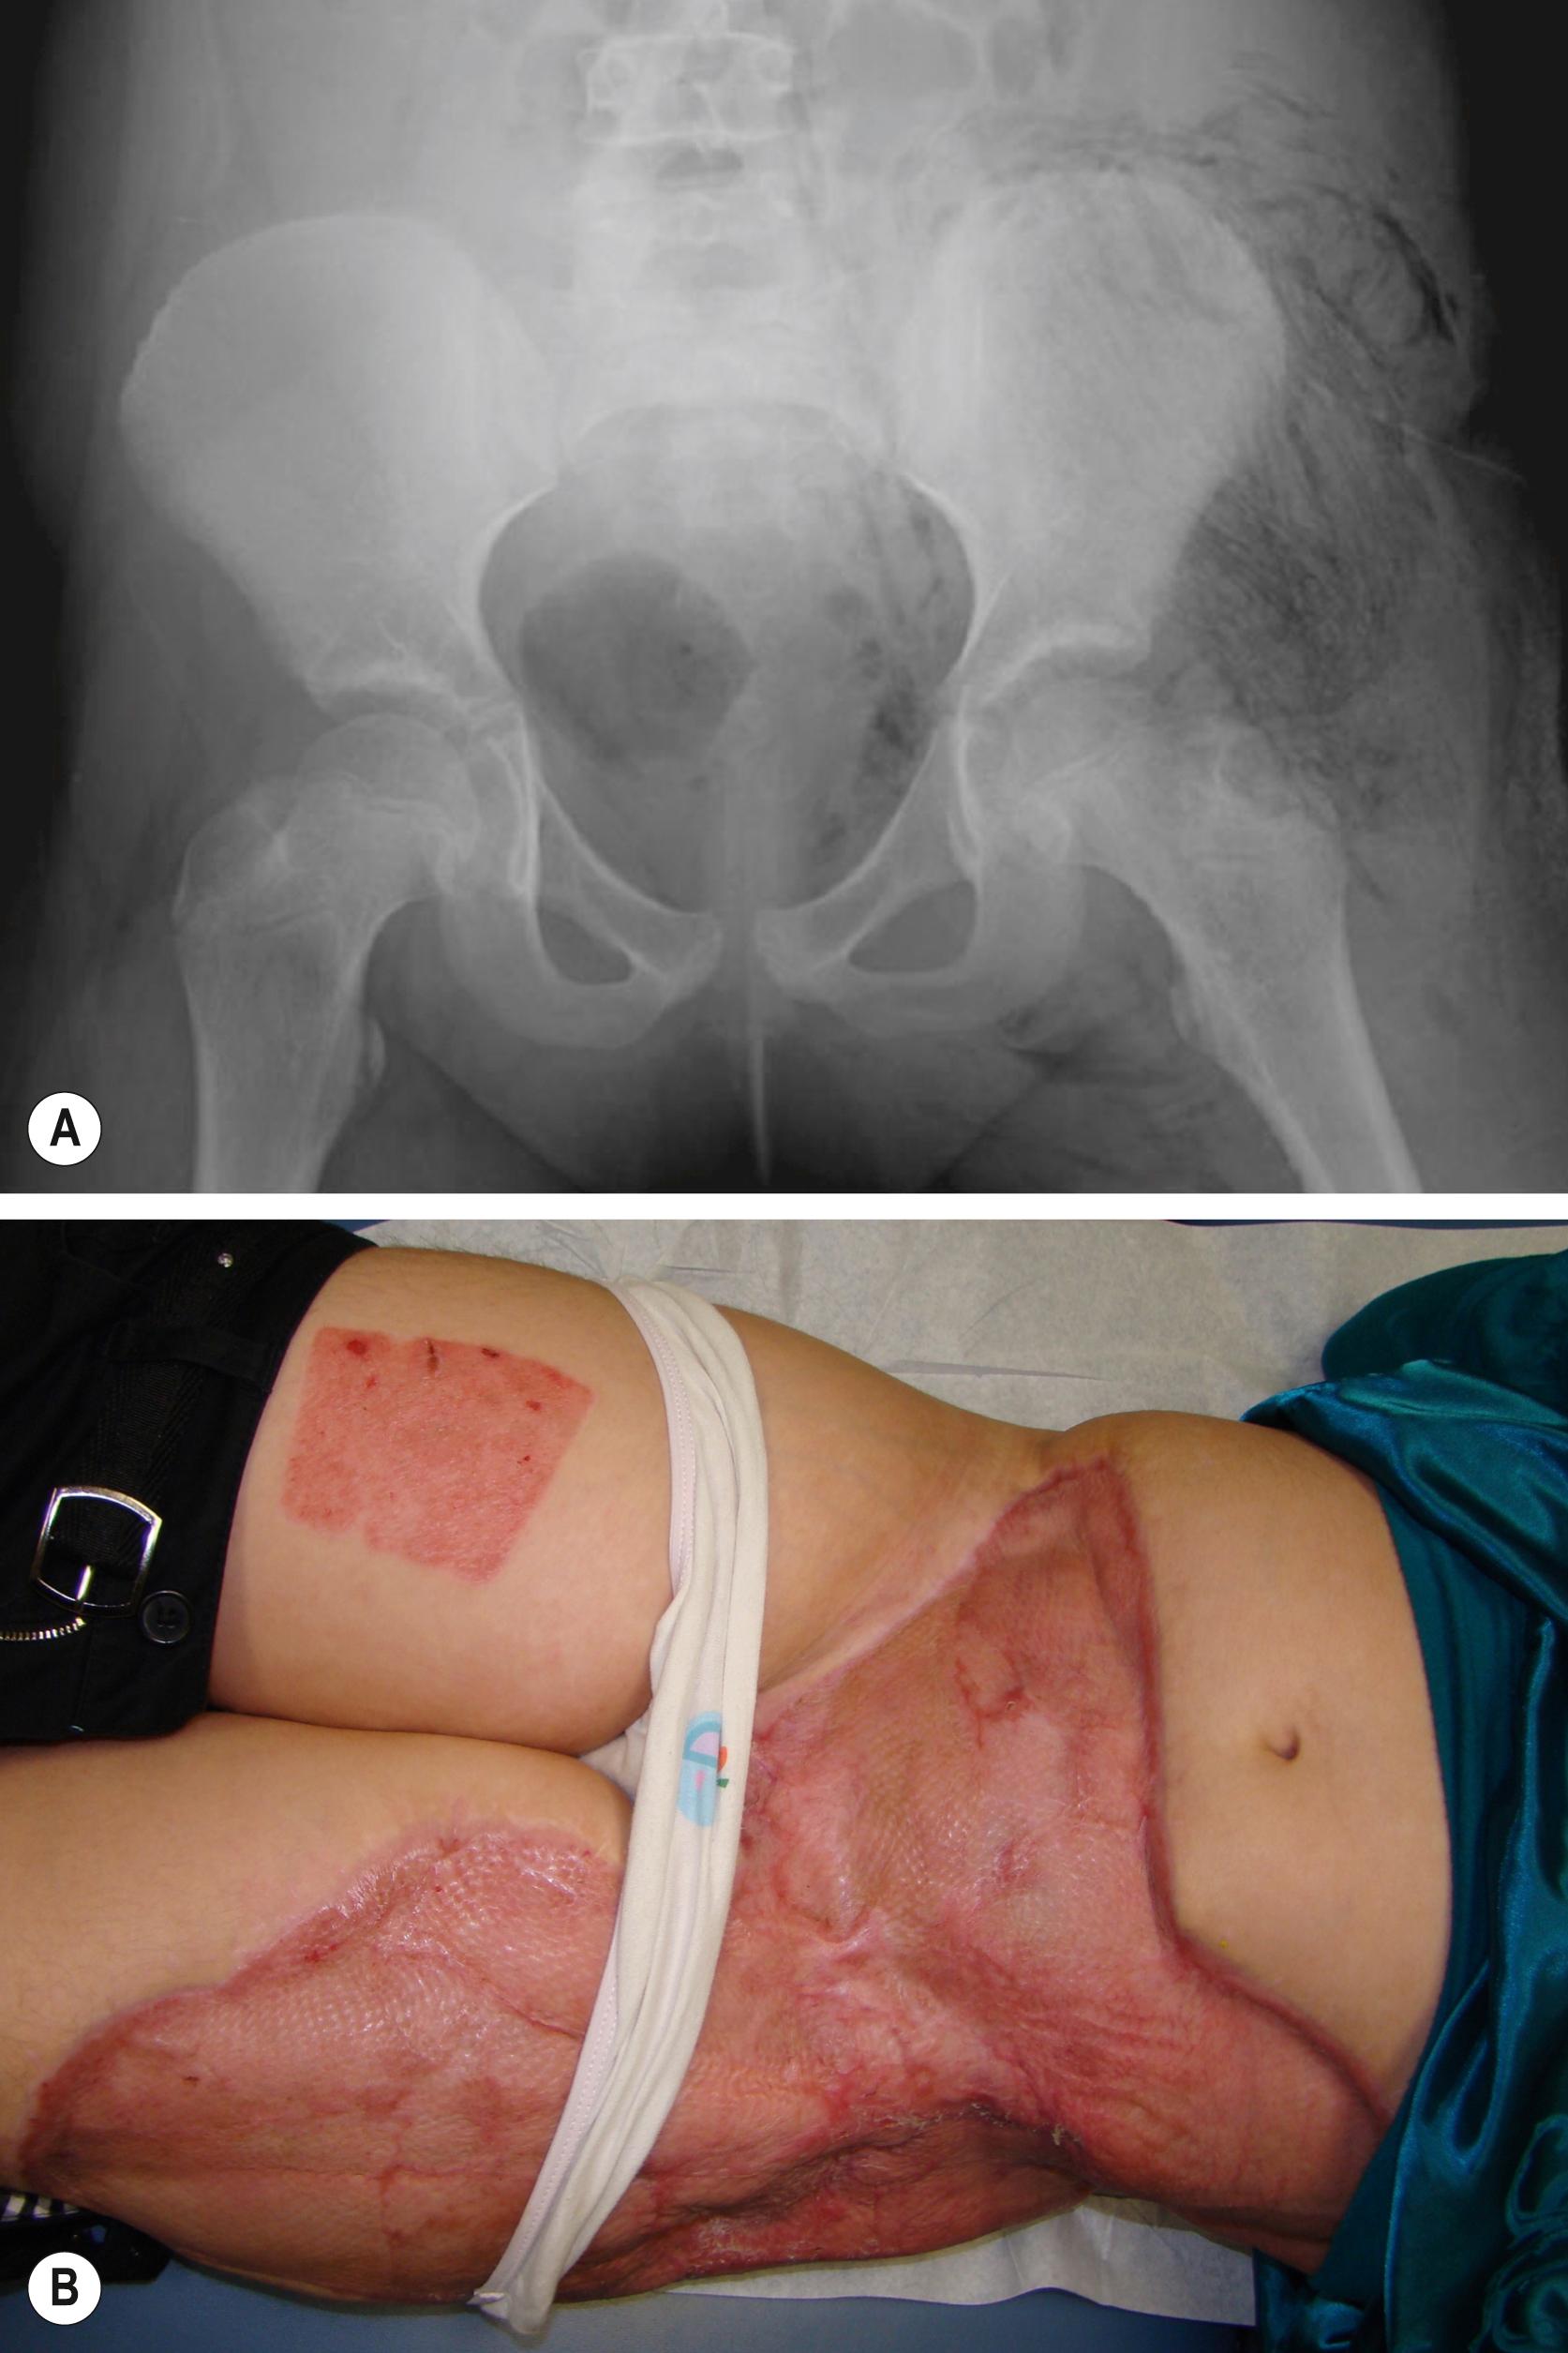 FIGURE 191.1, 9-year-old girl with MyD88 deficiency (caused by myeloid differentiation primary response gene) had a 5-day history of abdominal pain and acute onset of left thigh and buttock pain. (A) Frontal radiograph shows diffuse, left-sided linear radiolucencies indicative of gas in muscle planes and soft tissues. (B) Urgent, widely extensive, and frequent operative debridement procedures were performed, followed by muscle flap and grafting. Clostridium septicum was isolated from tissue.